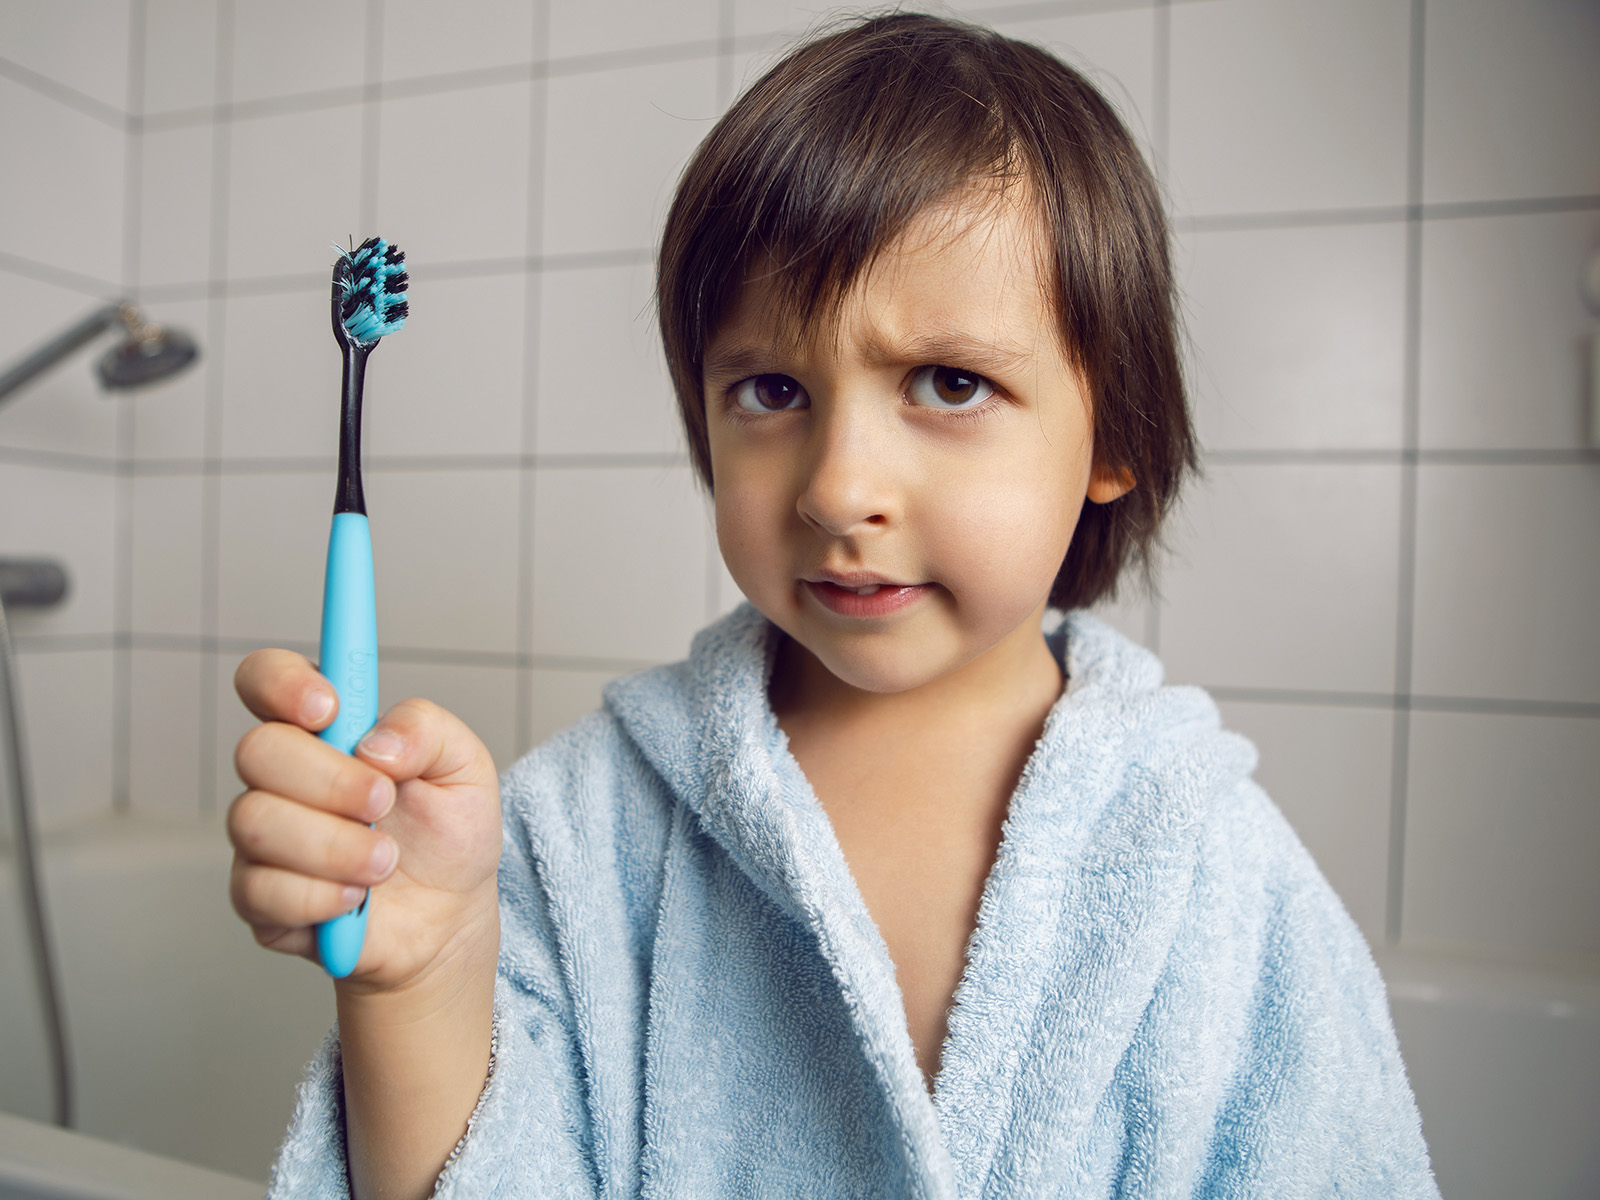 What If My Child Hates Brushing Their Teeth?